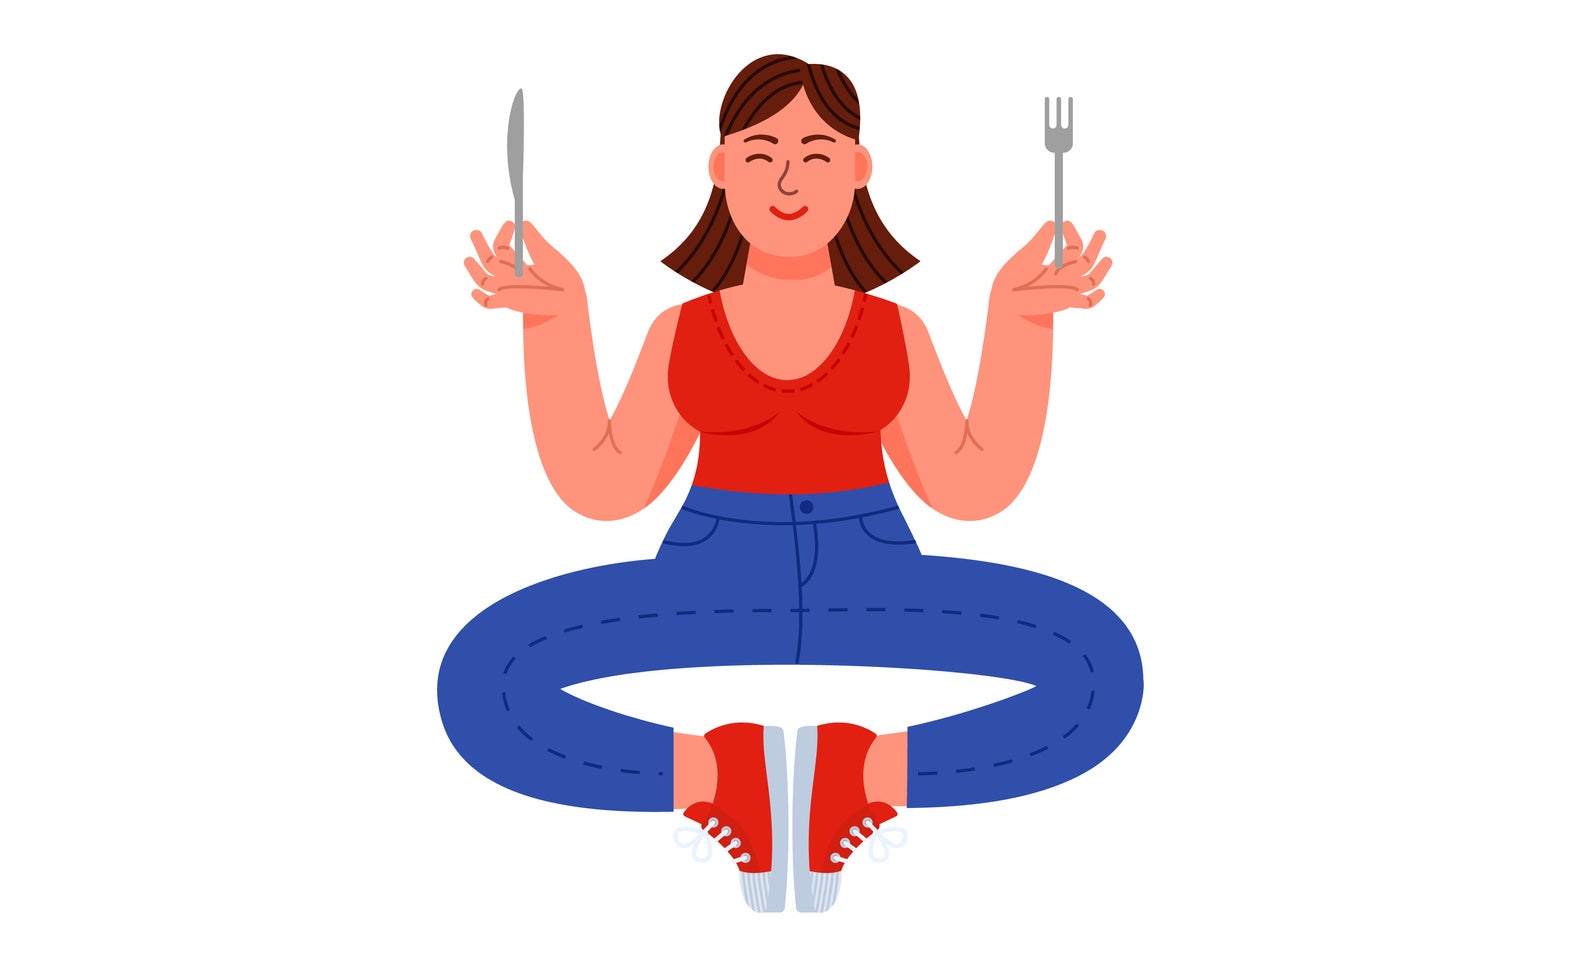 Illustration of a woman sitting cross-legged holding a knife and fork, looking content